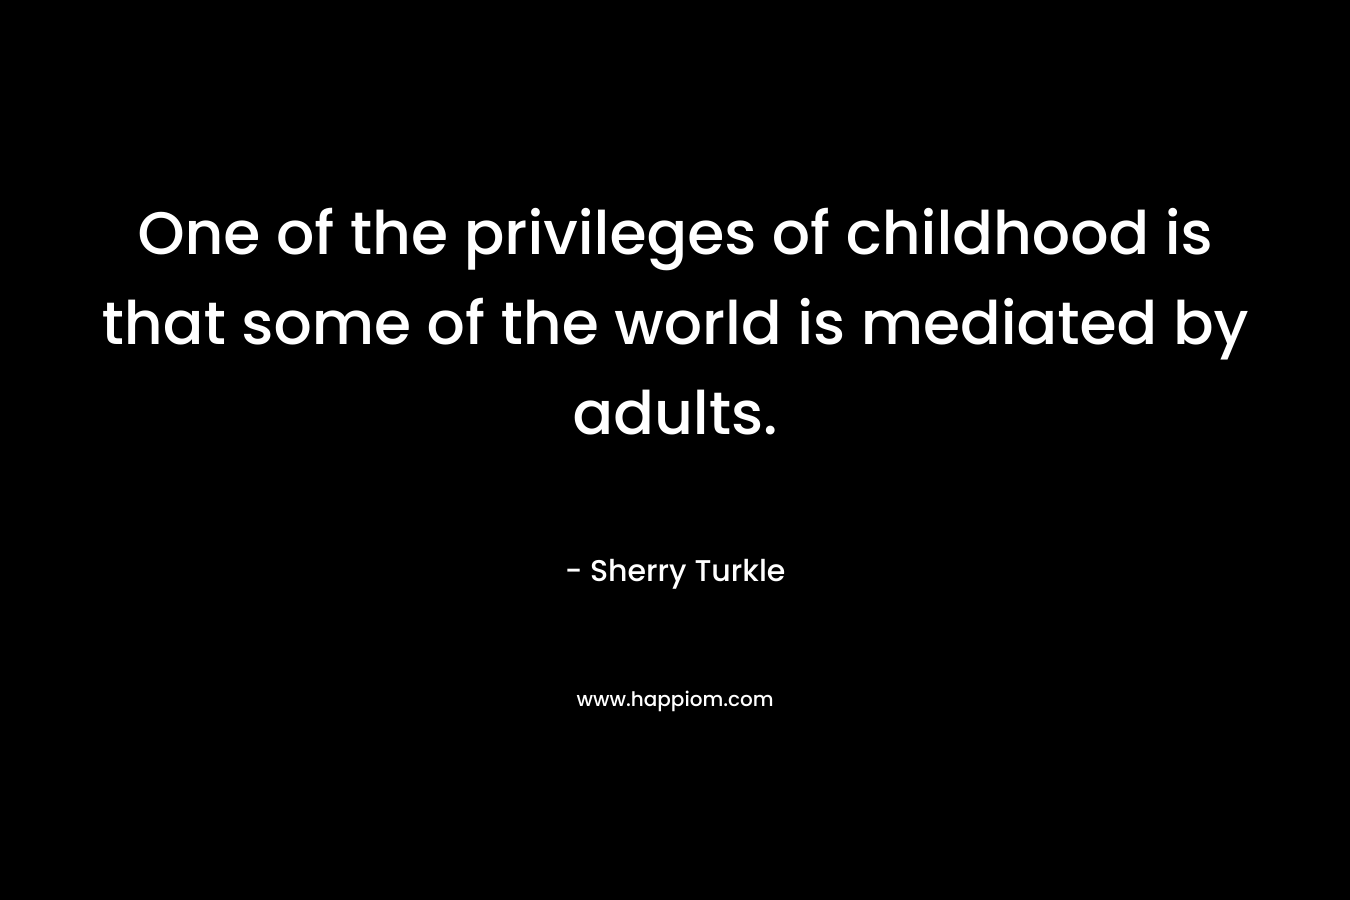 One of the privileges of childhood is that some of the world is mediated by adults. – Sherry Turkle